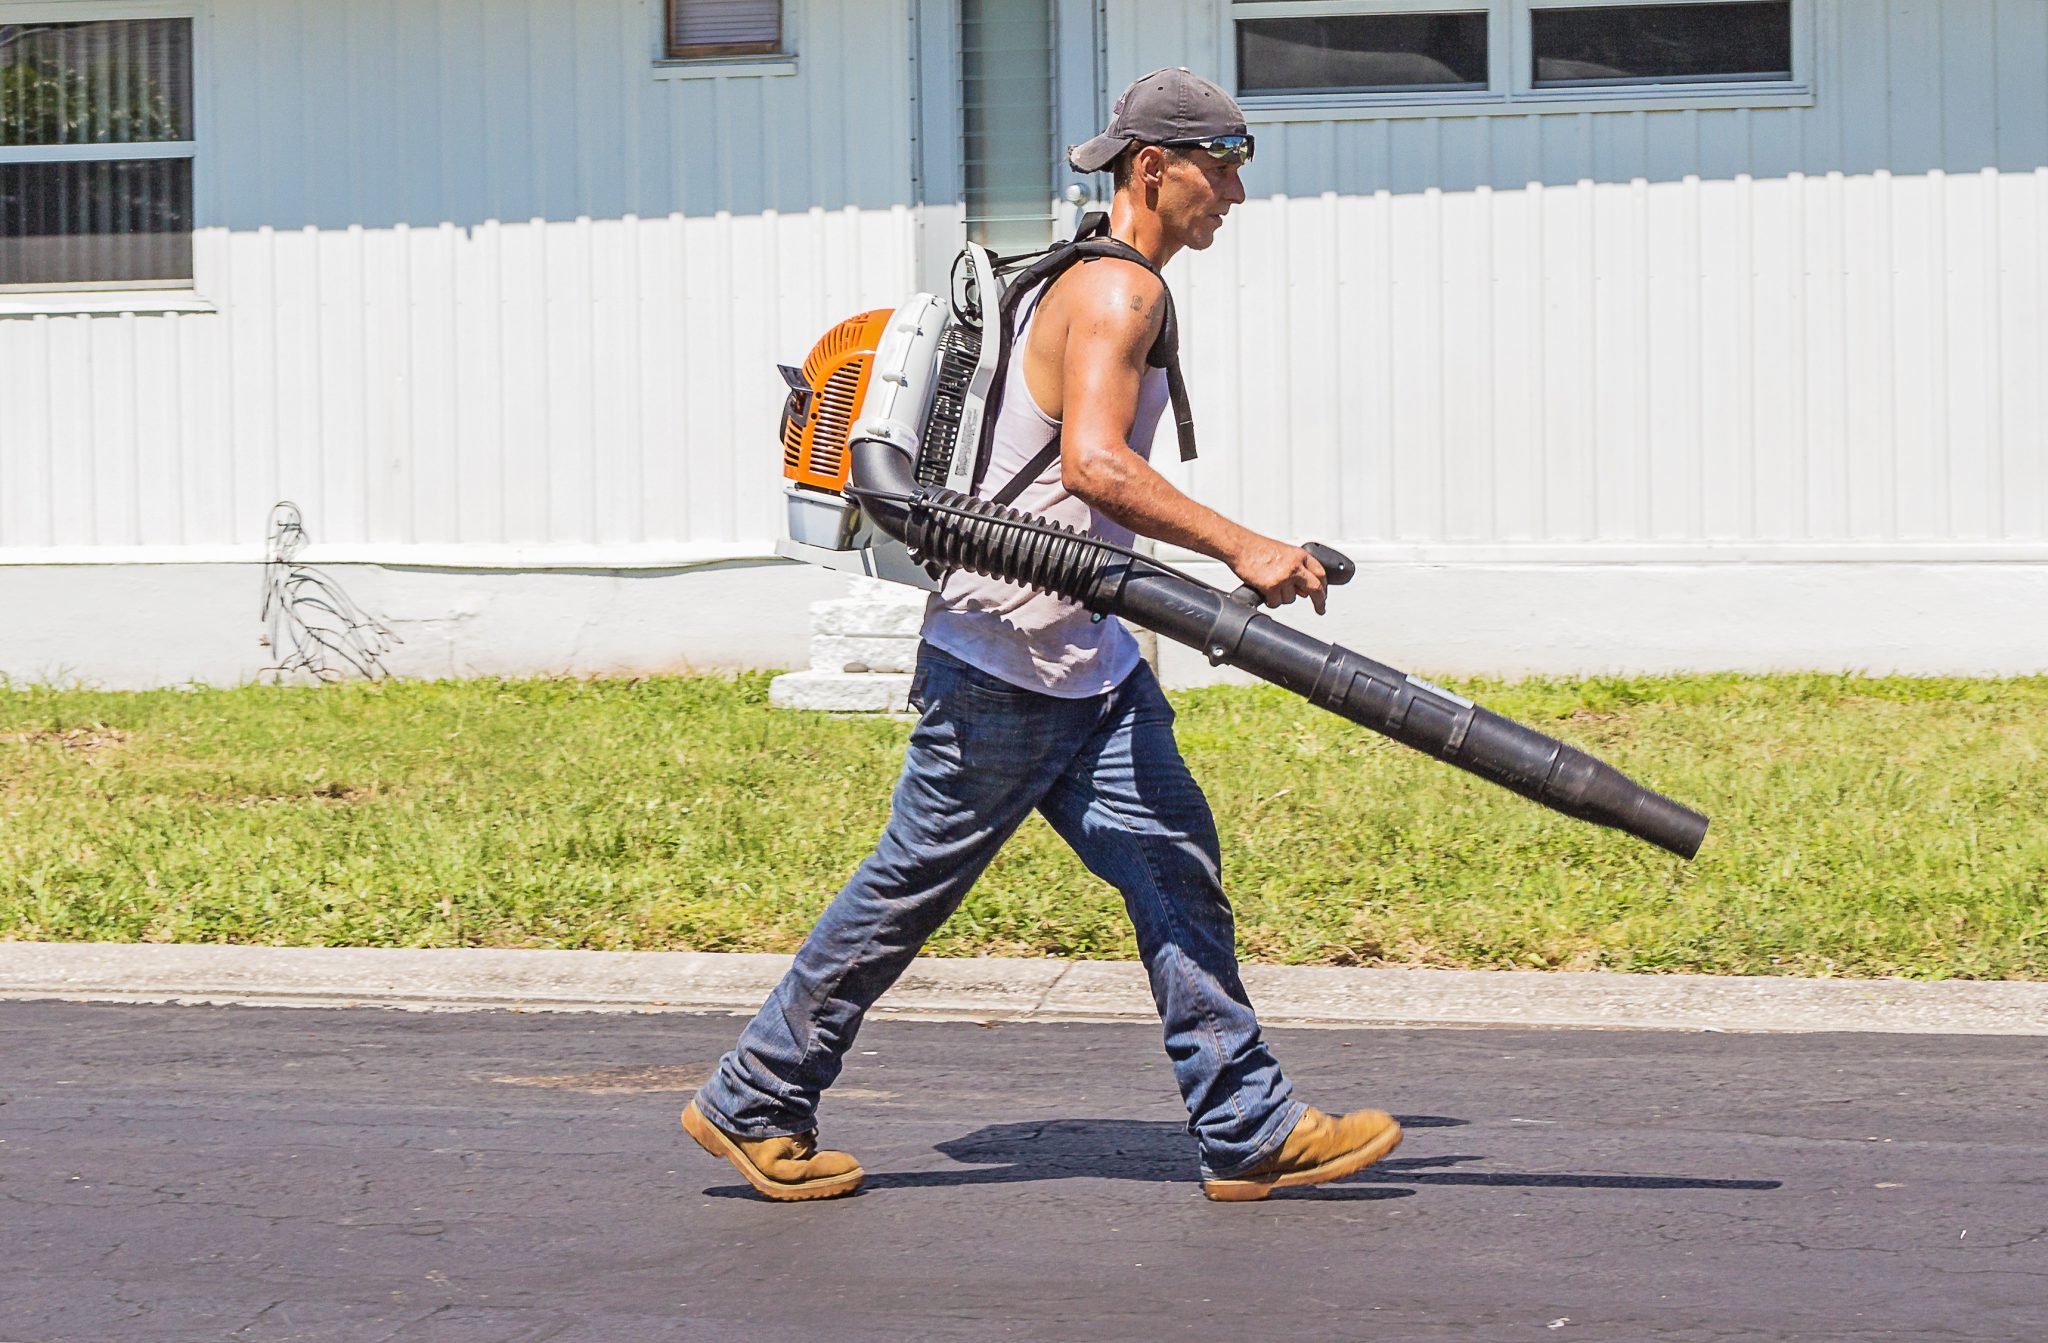 Noise isn’t just a city problem — Leaf blowers are a major issue for towns